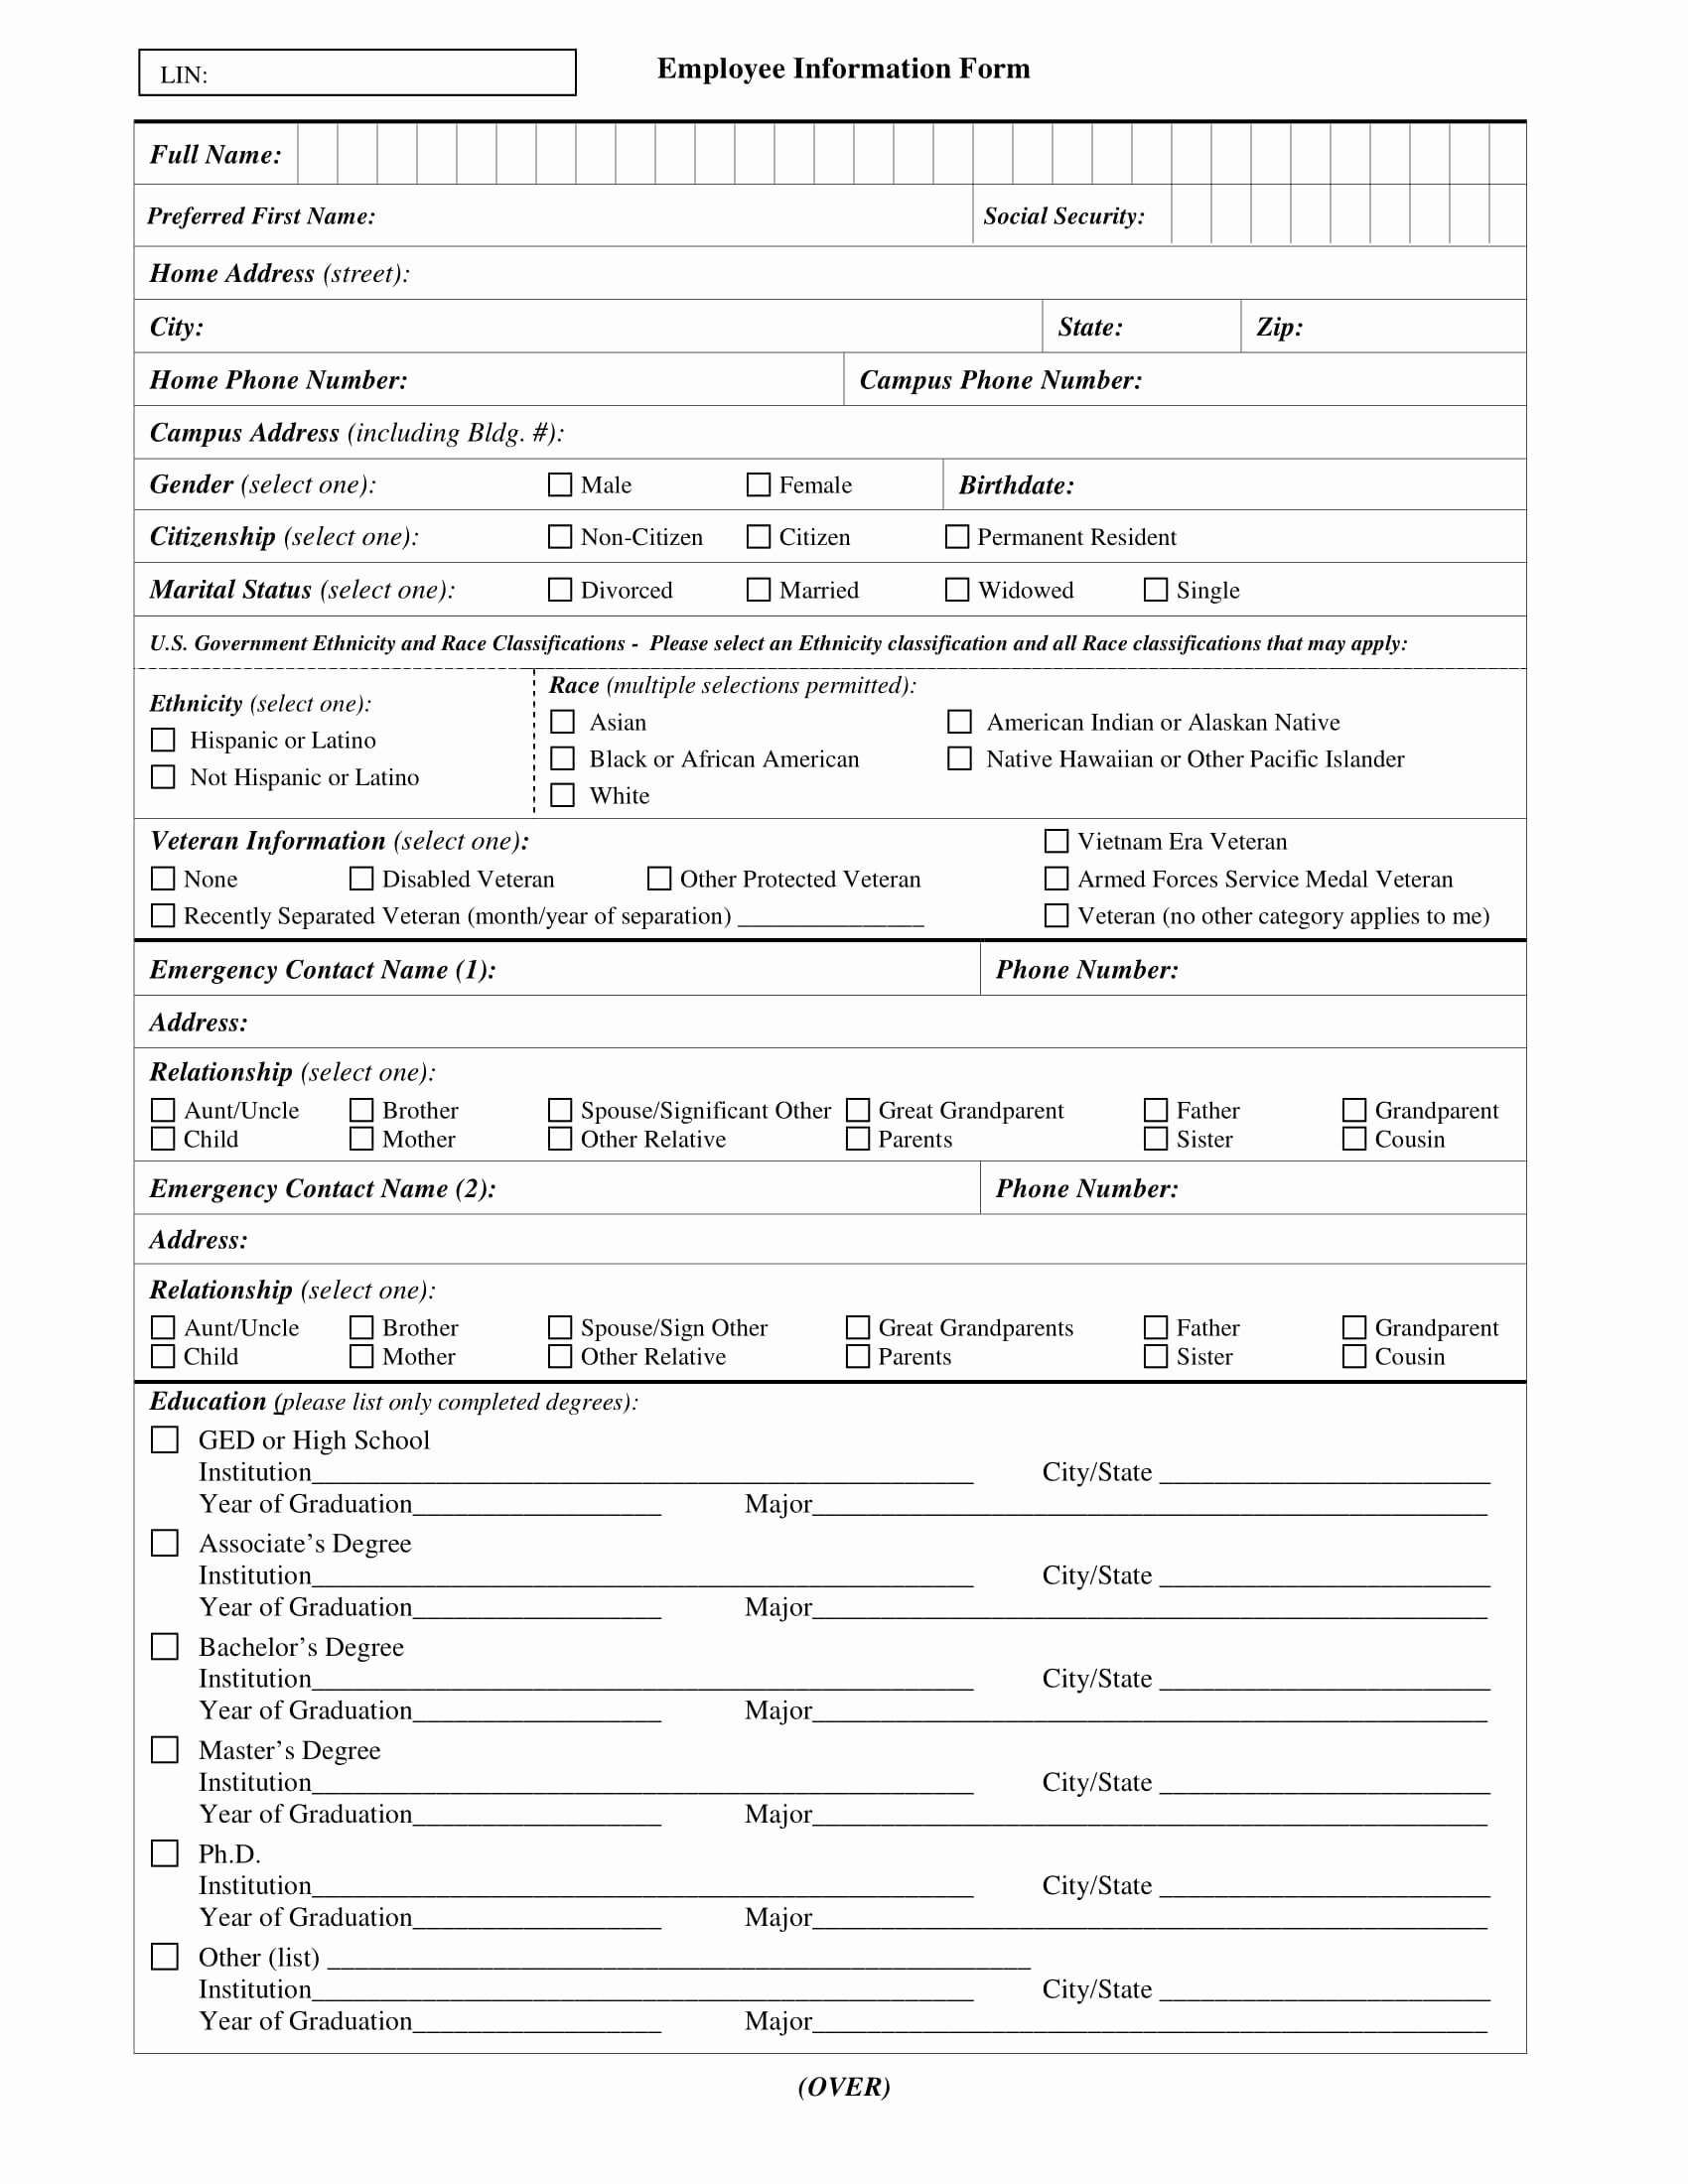 Employment Information form Template Fresh Employee Information form 31 Examples In Word Pdf